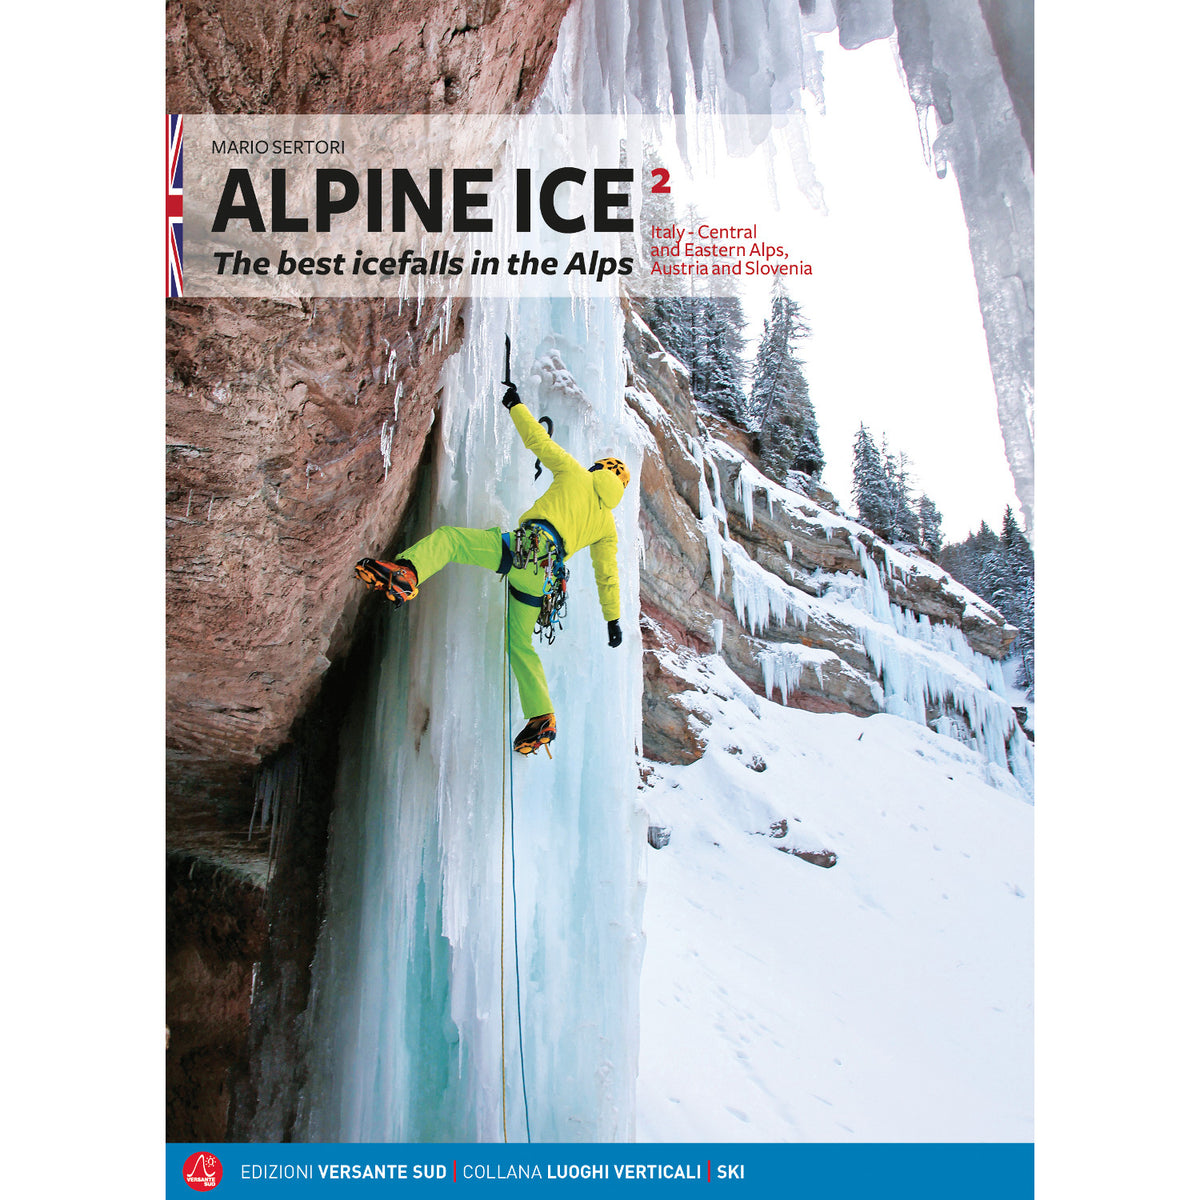 Alpine Ice - The Best Icefalls in the Alps Vol. 2